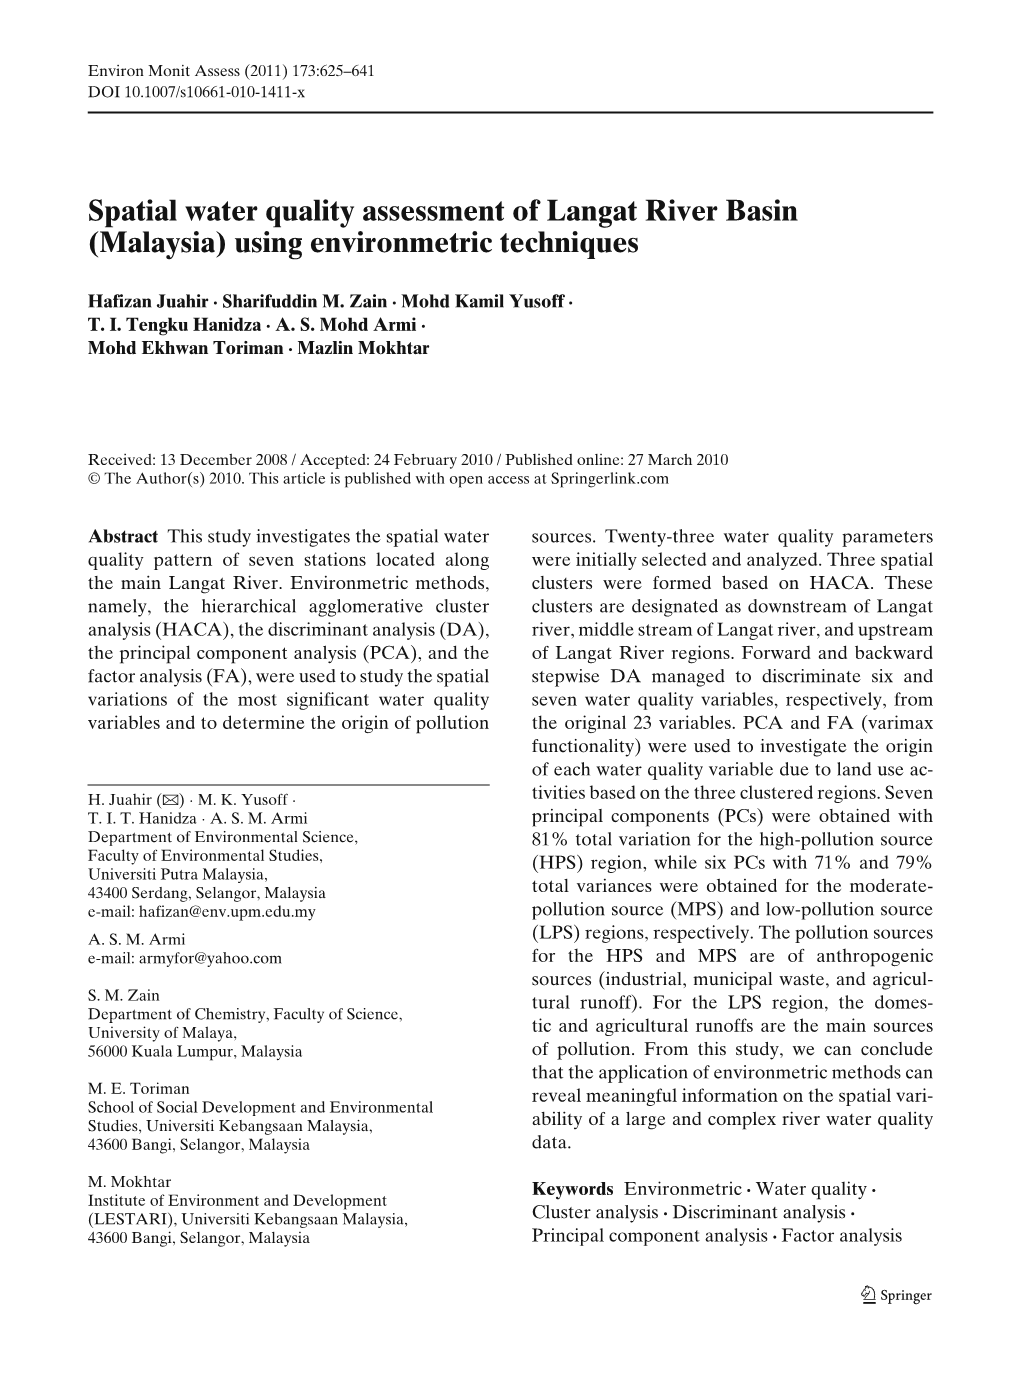 Spatial Water Quality Assessment of Langat River Basin (Malaysia) Using Environmetric Techniques